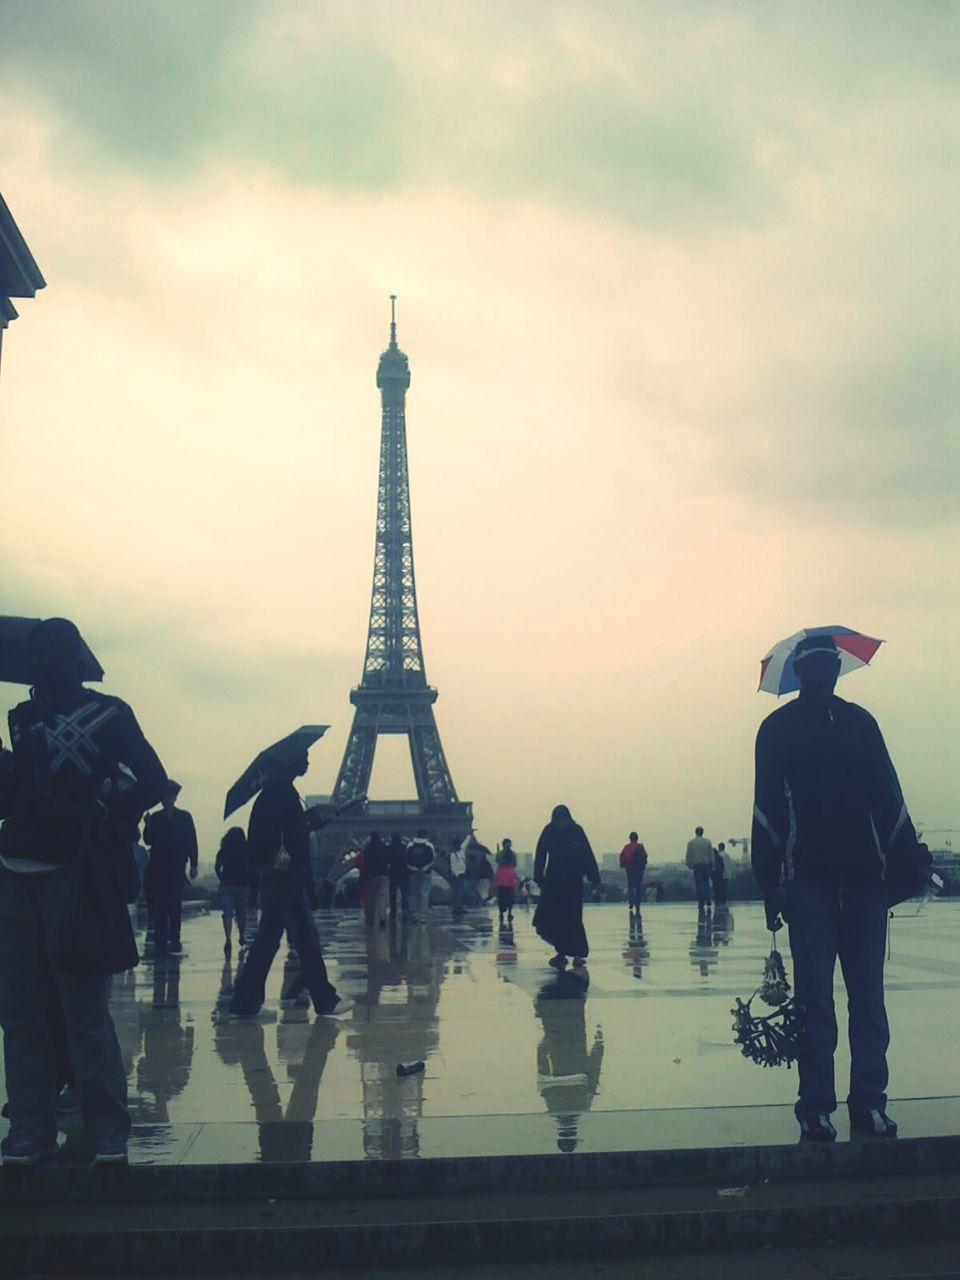 People by eiffel tower against sky on rainy day